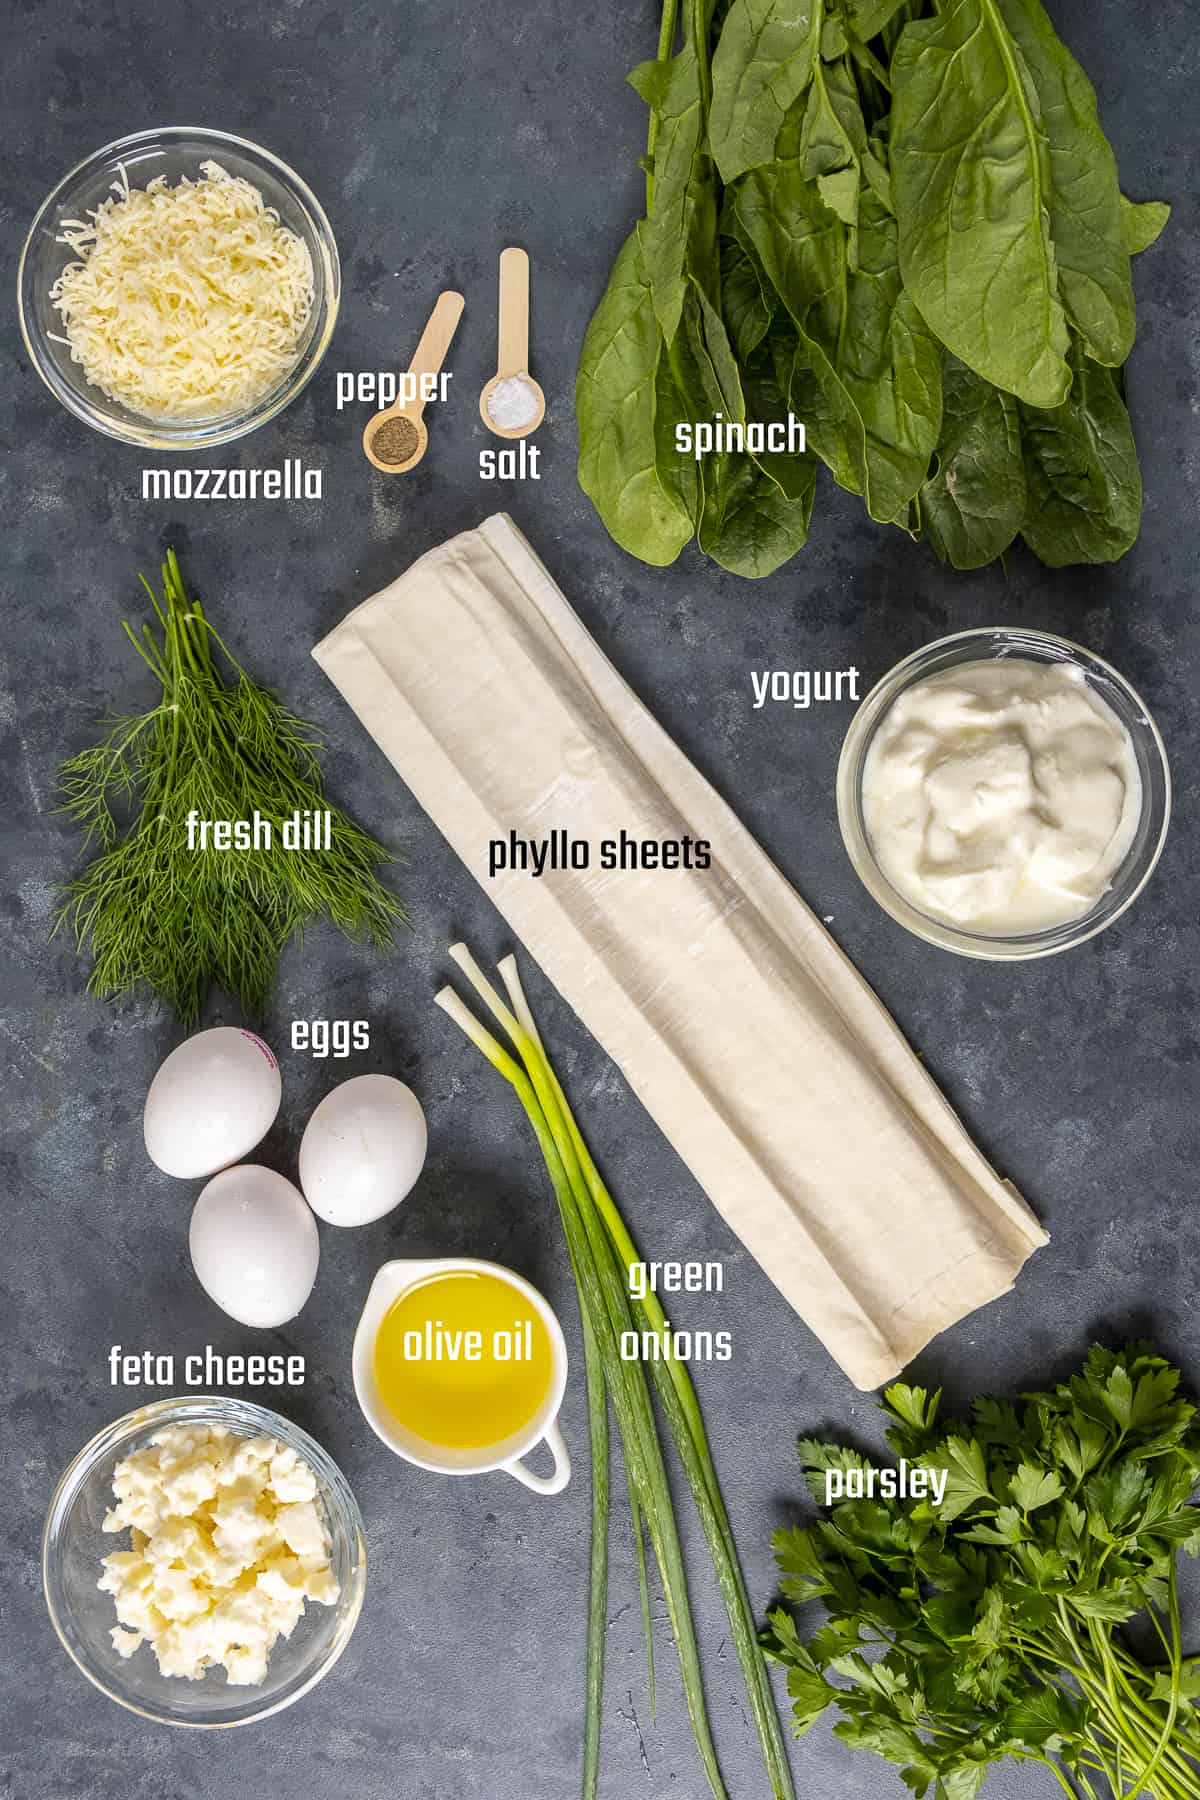 Phyllo sheets, spinach, parsley, dill, green onions, eggs, yogurt, olive oil and cheeses on a dark background.